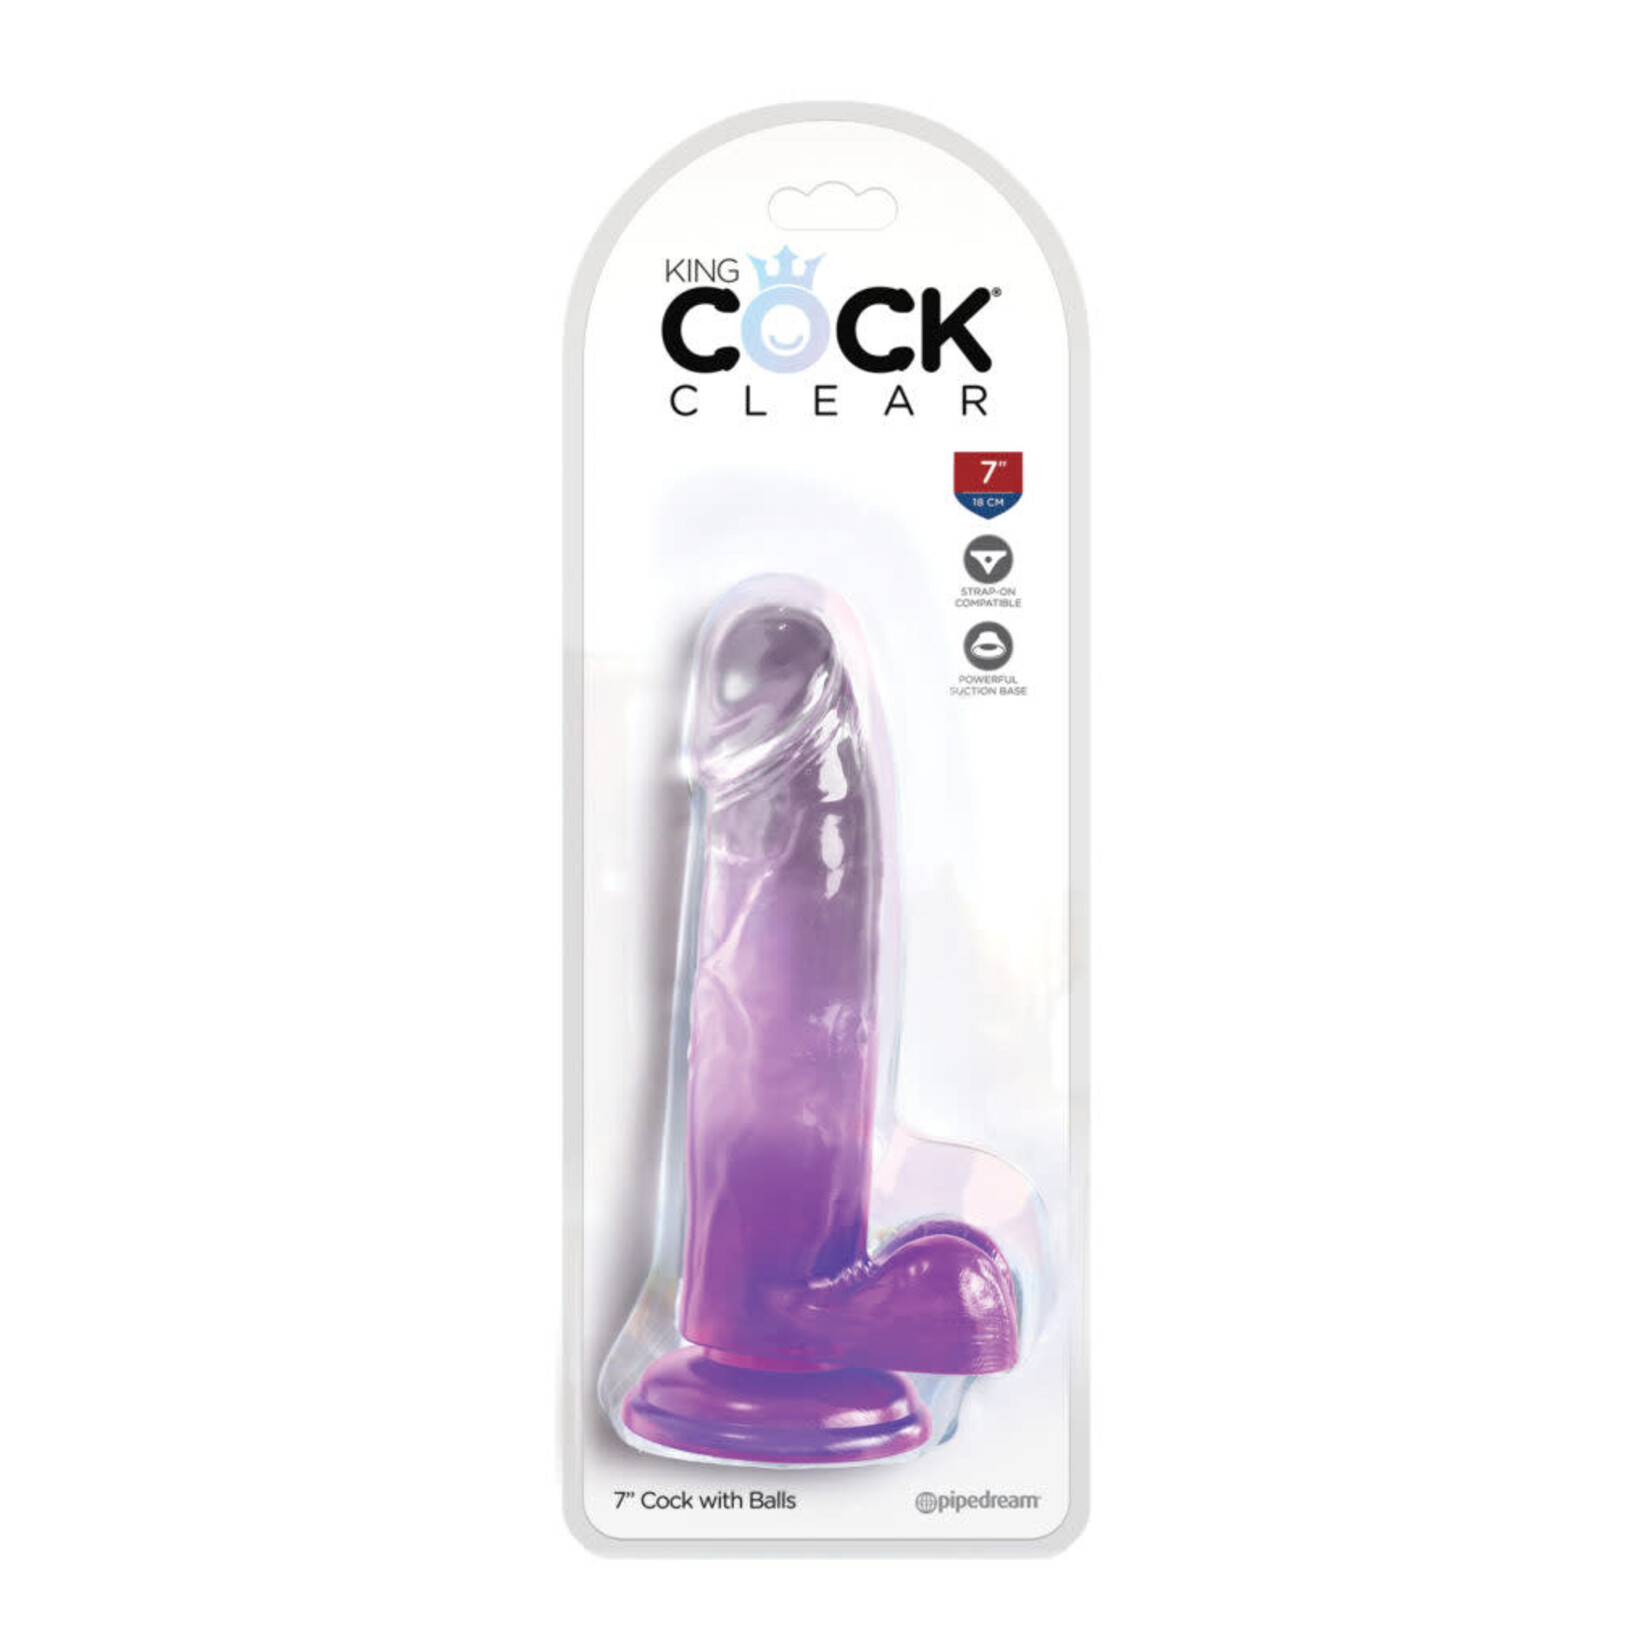 KING COCK KING COCK - CLEAR 7" COCK WITH BALLS - PURPLE